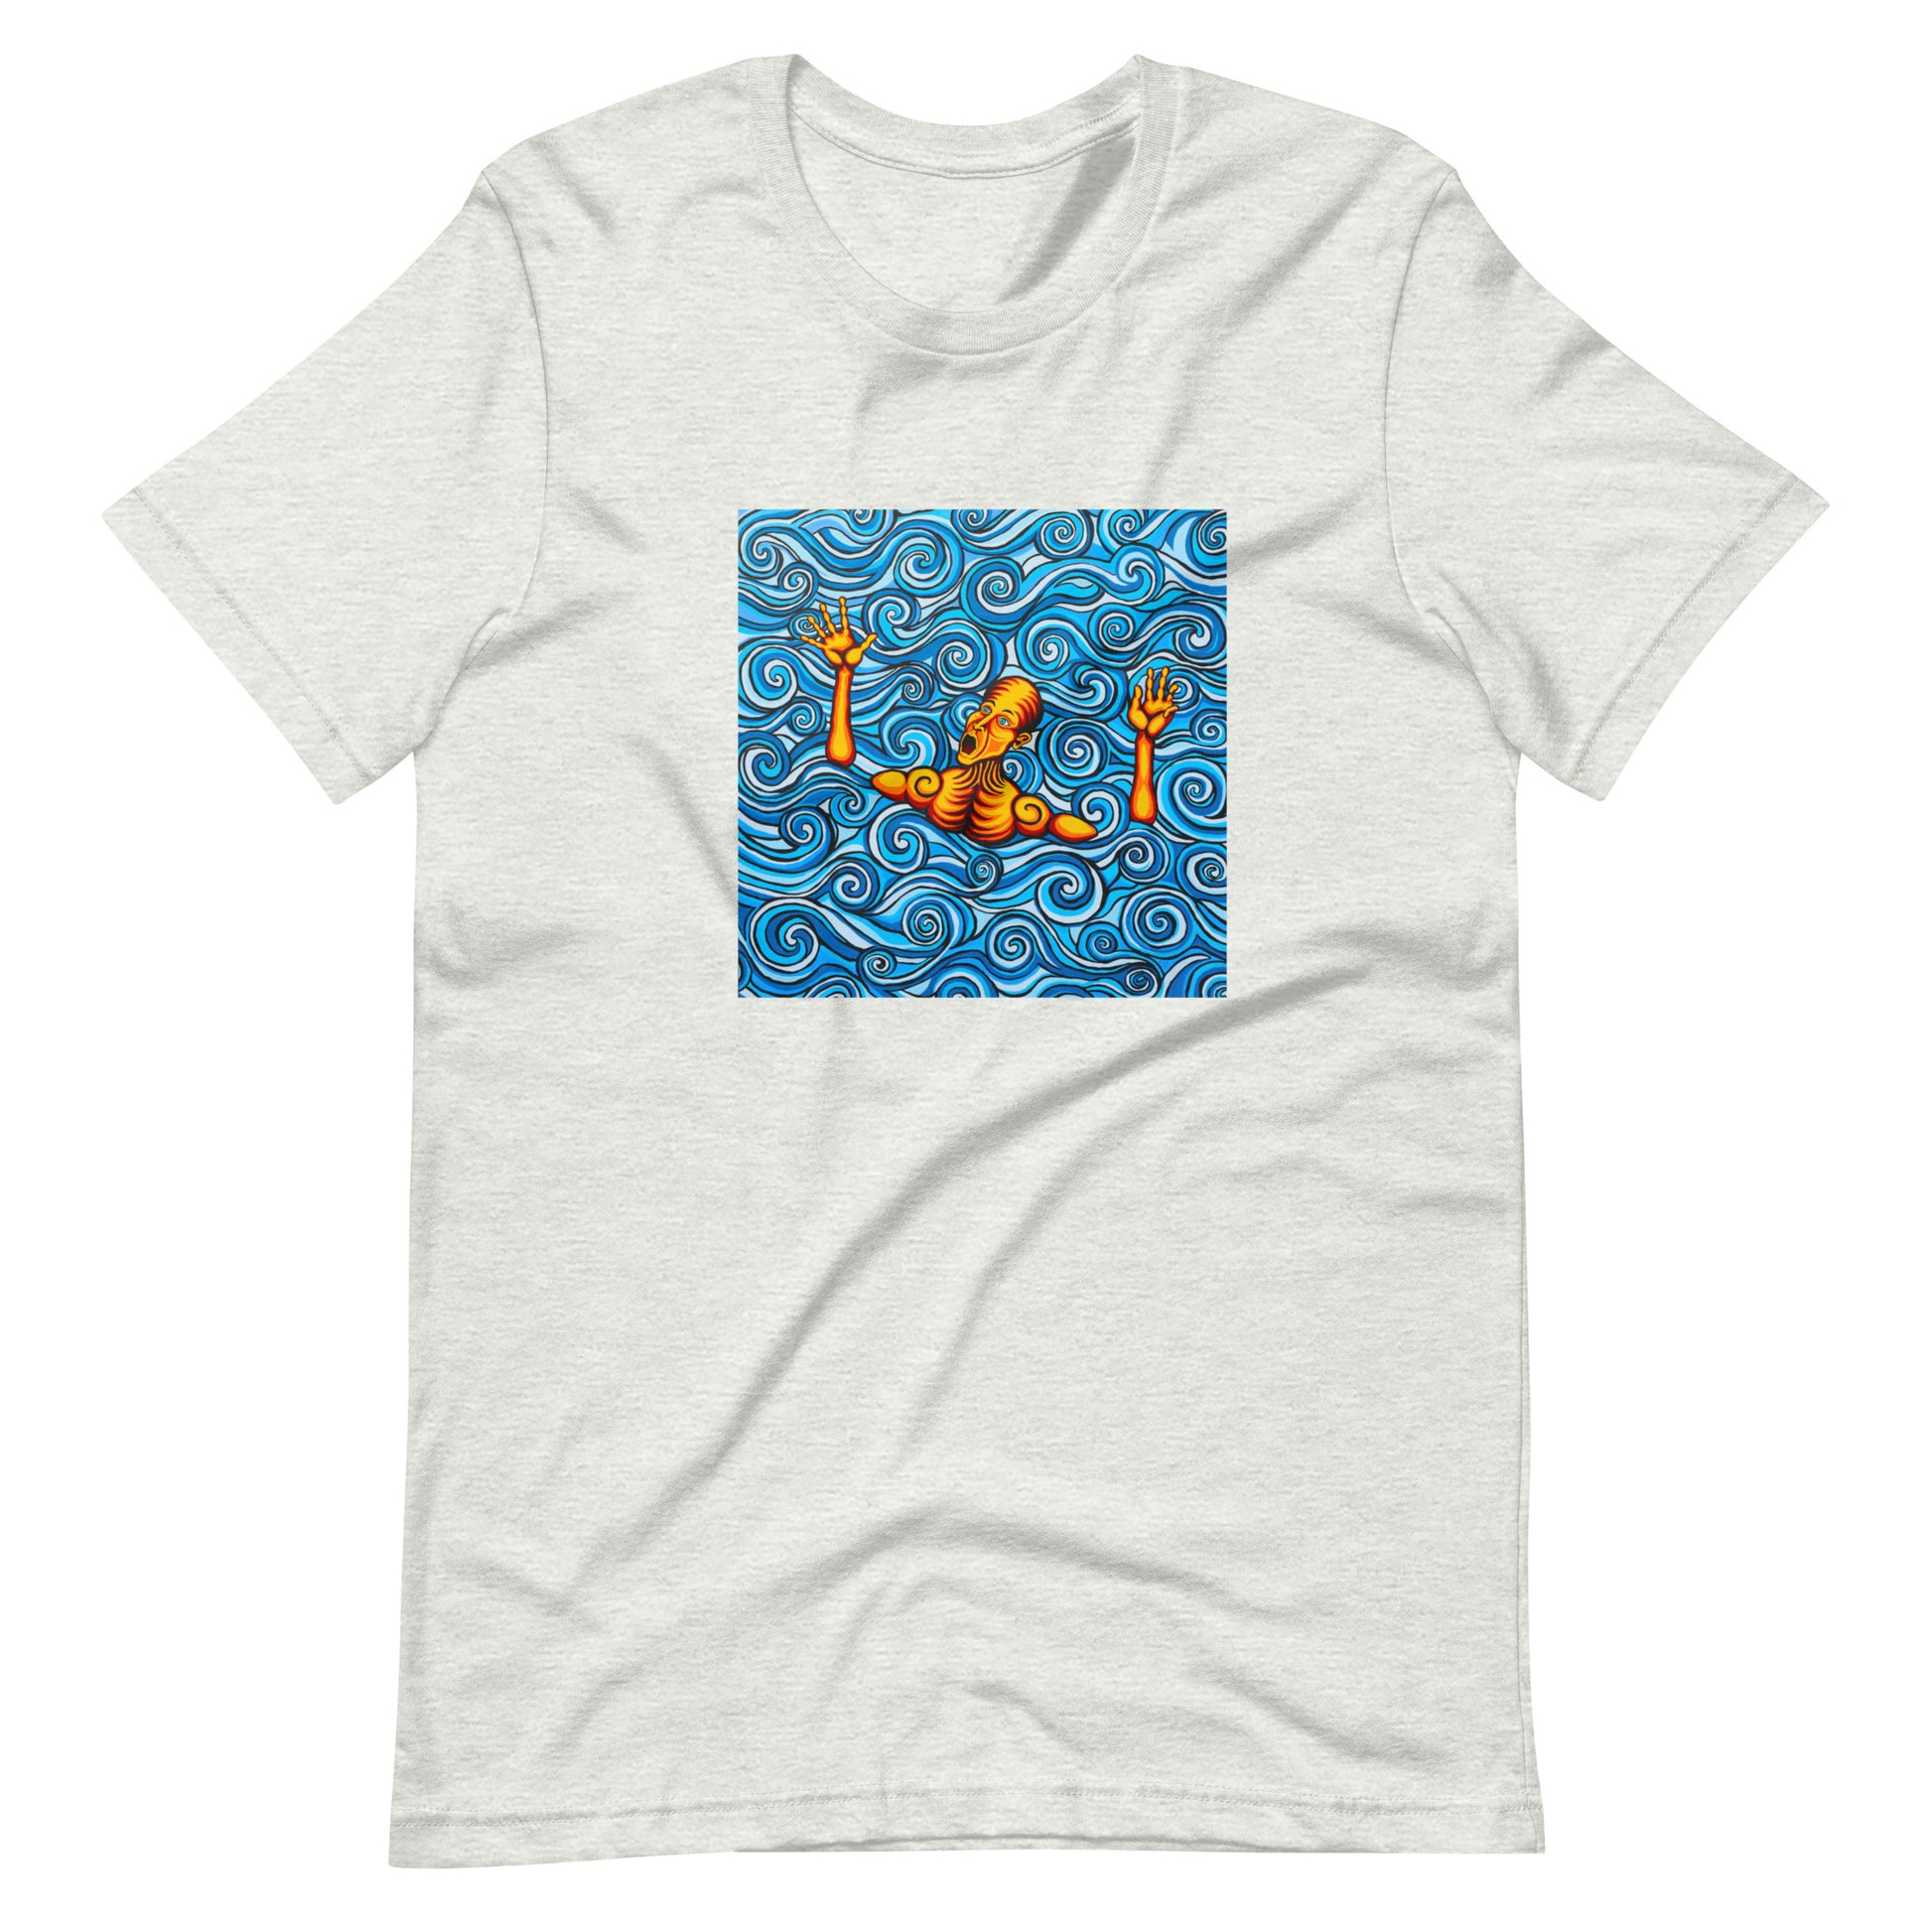 Drowning in 2021. Unisex t-shirt